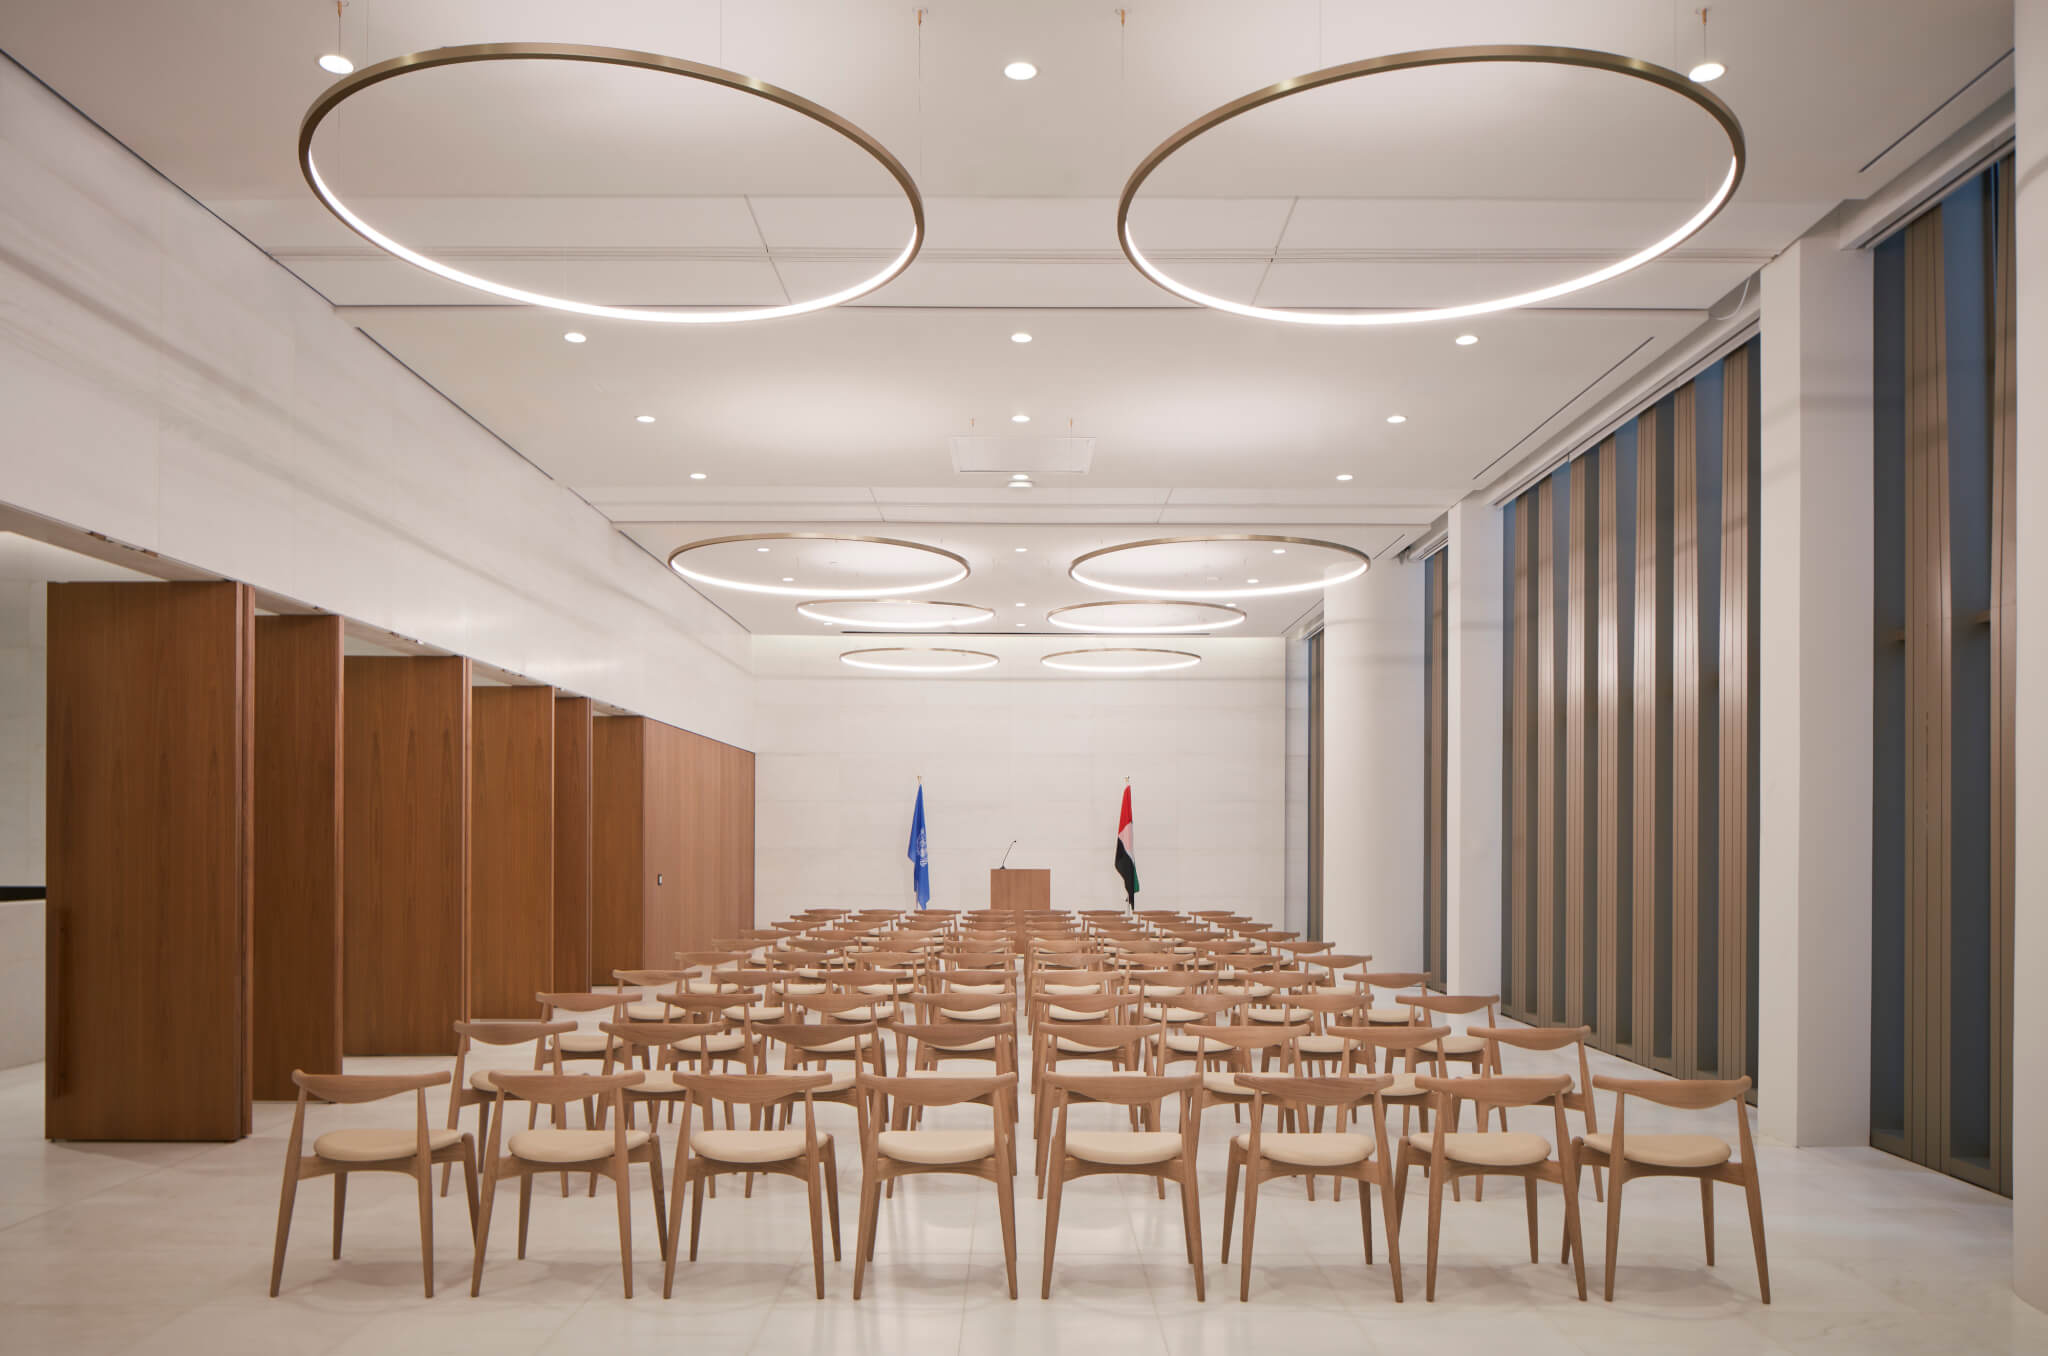 circular light fixtures with chairs lined up in rows